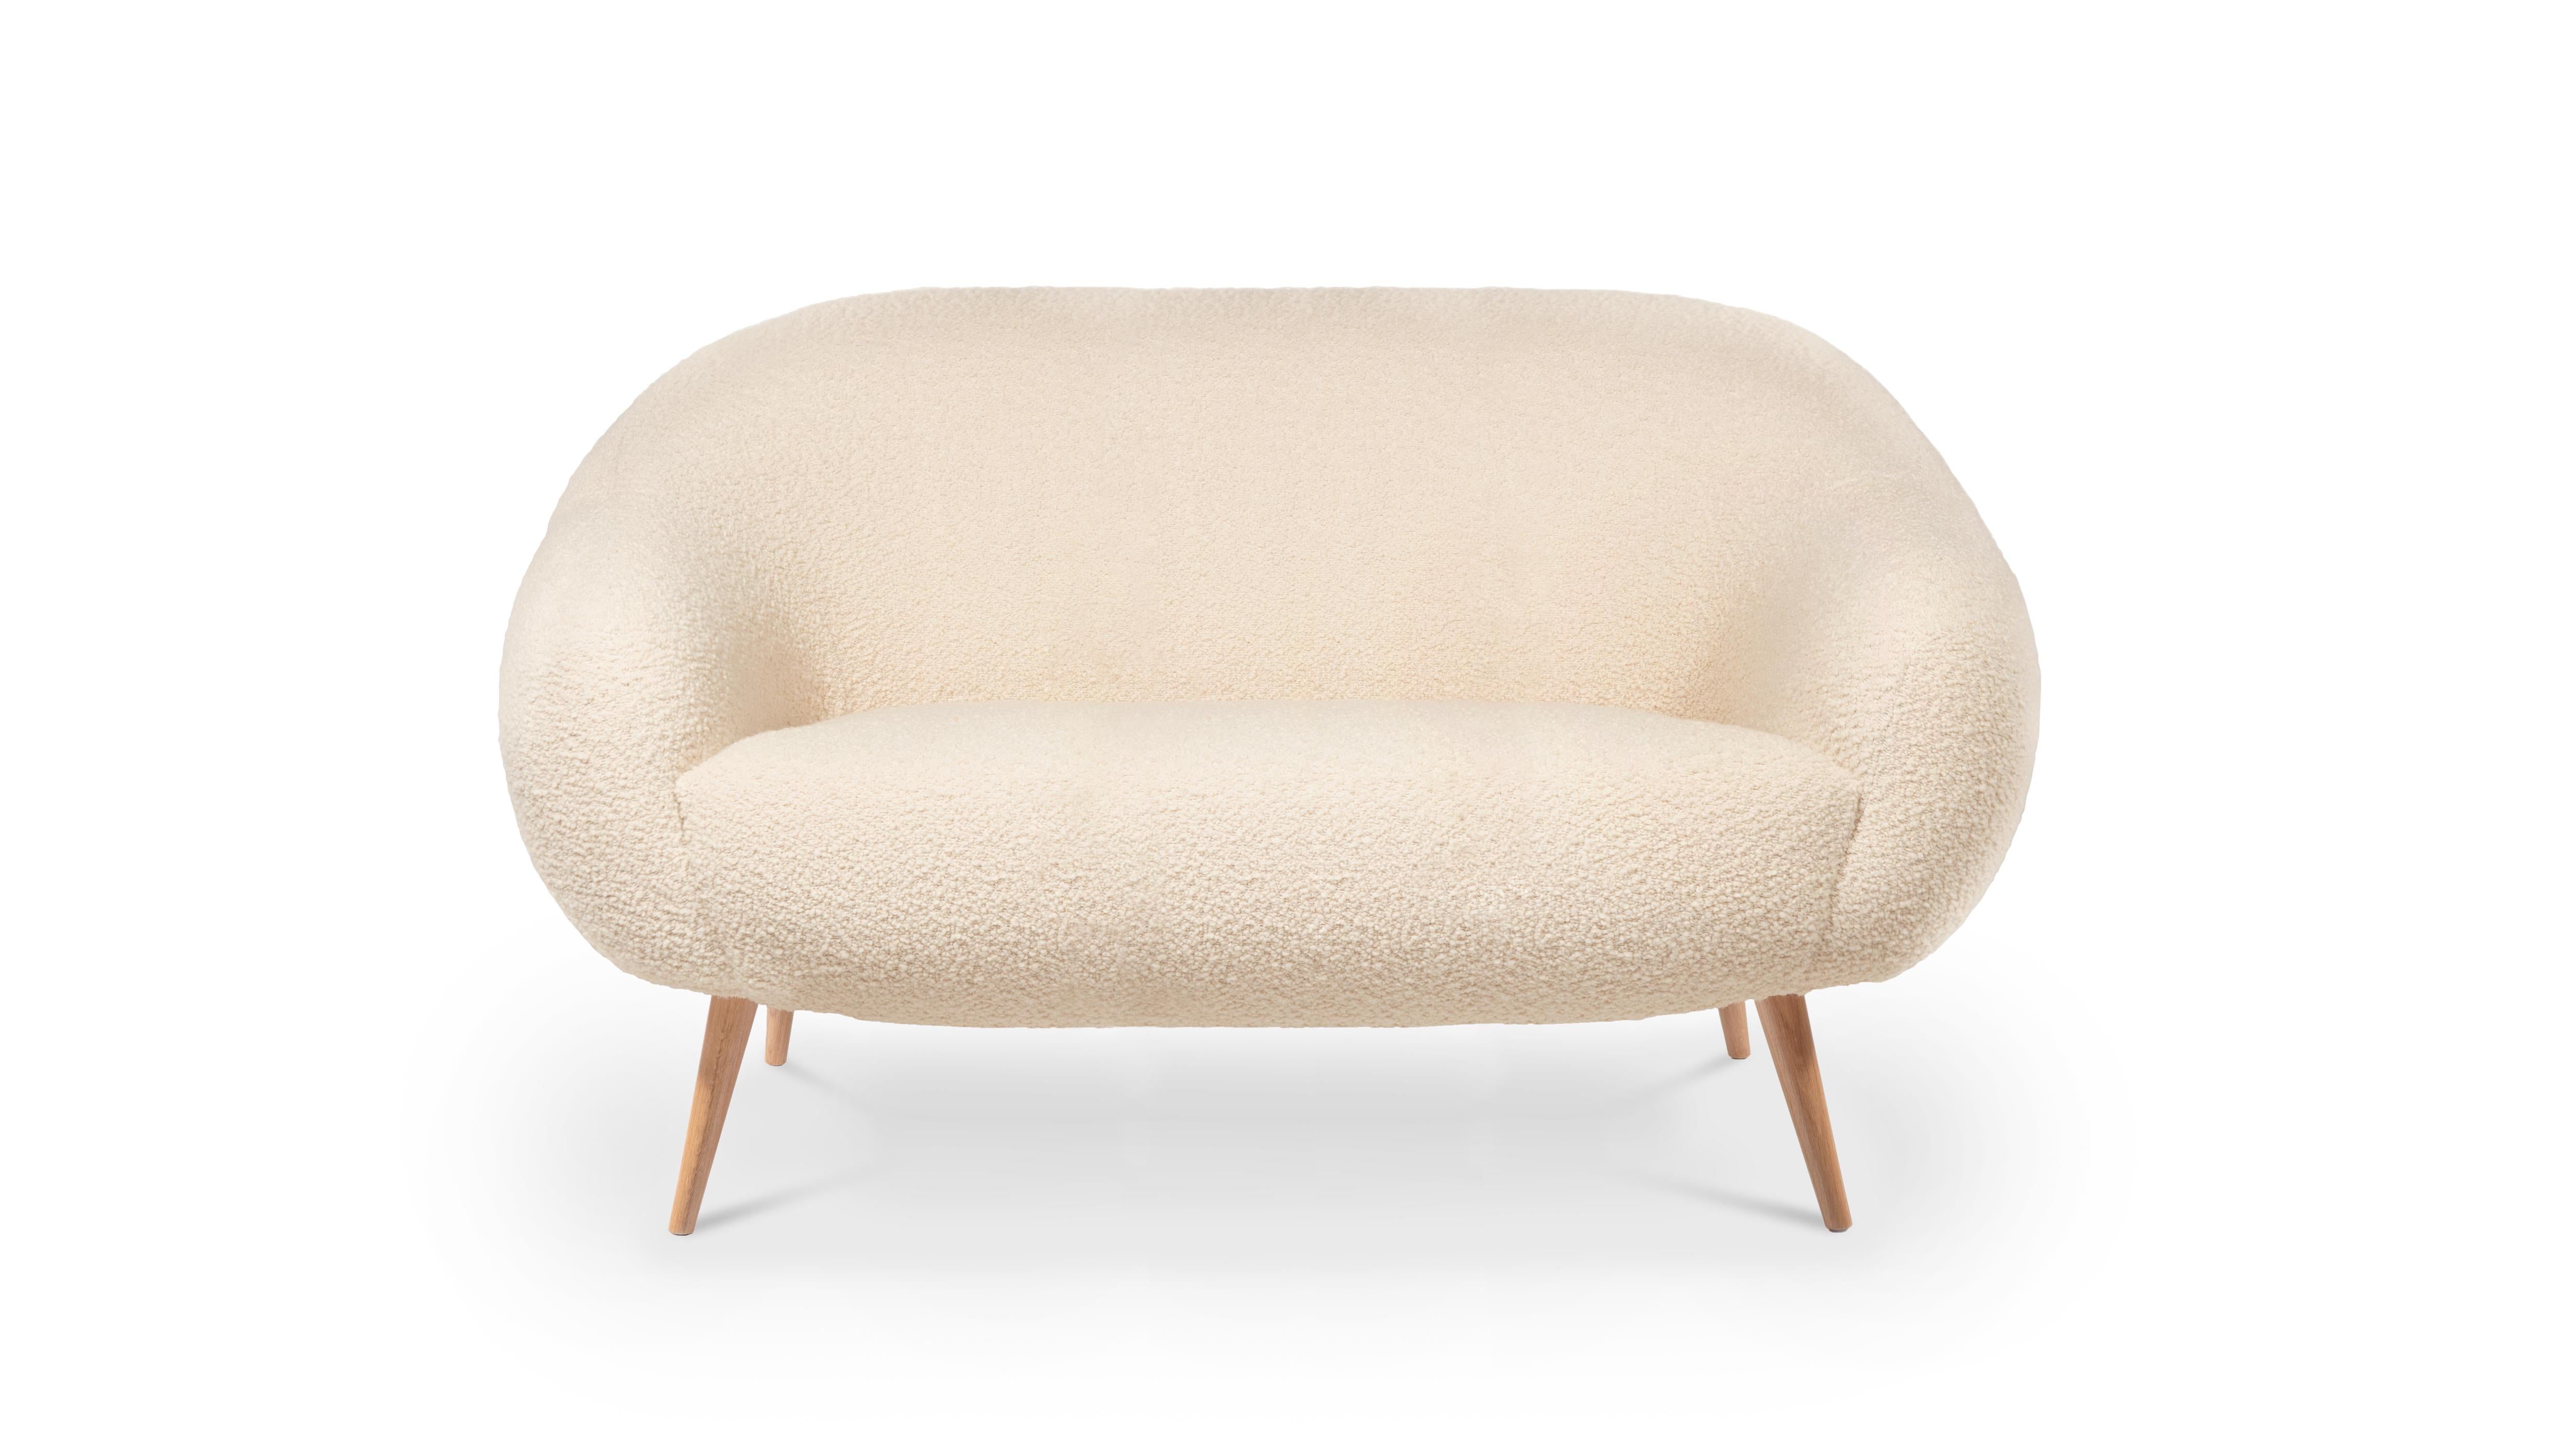 Niemeyer 2 Seat Sofa by InsidherLand
Dimensions: D 92 x W 180 x H 86 cm.
Materials: Oak, brushed brass, InsidherLand Woollen Ref. 1 fabric.
56 kg.
Available in different fabrics.

The Niemeyer sofa is named after the Brazilian Architect Oscar